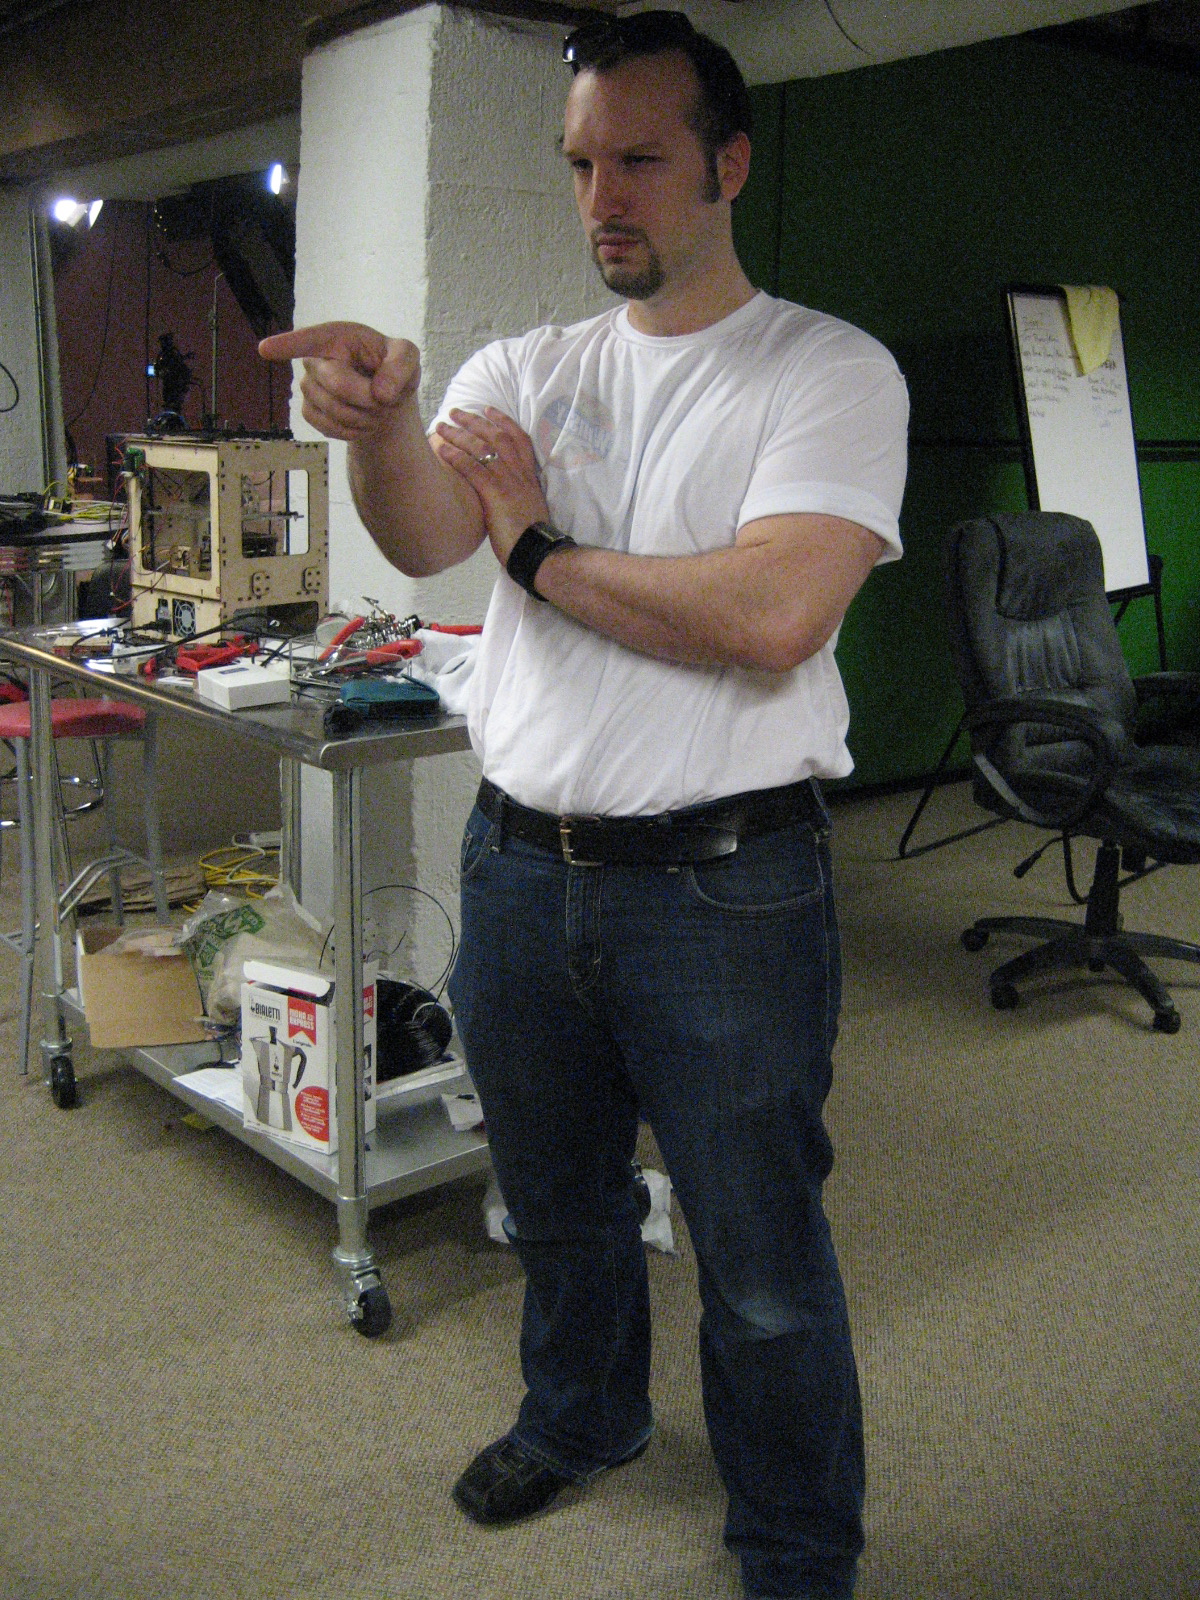  Alternate Reality Vinny.  White T-Shirt and Blue Jeans?  Never!  Pure EVIL.